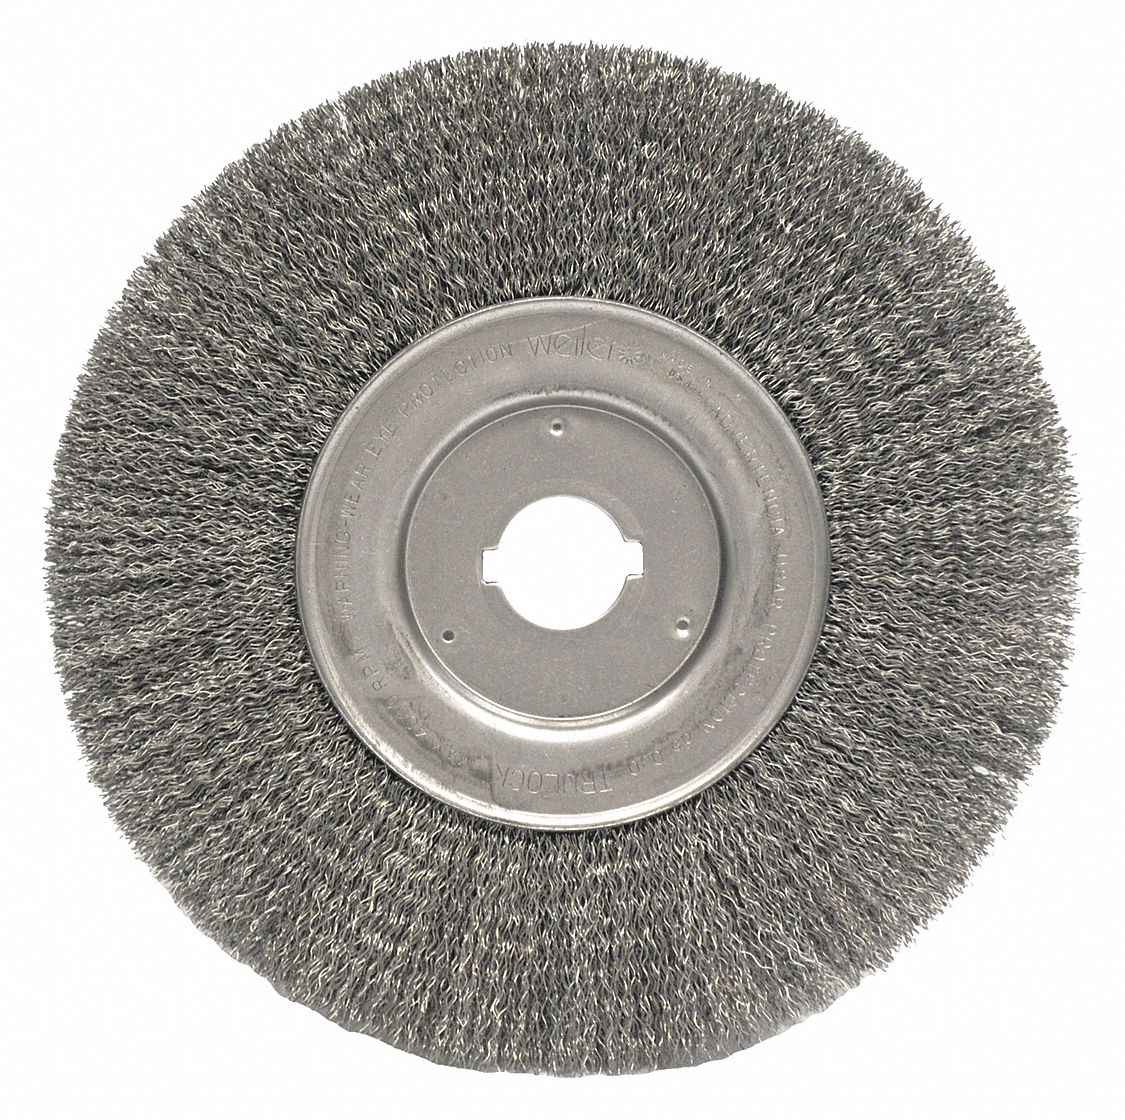 38P616 - 10 Narrow Crimped Wire Wheel - Only Shipped in Quantities of 2